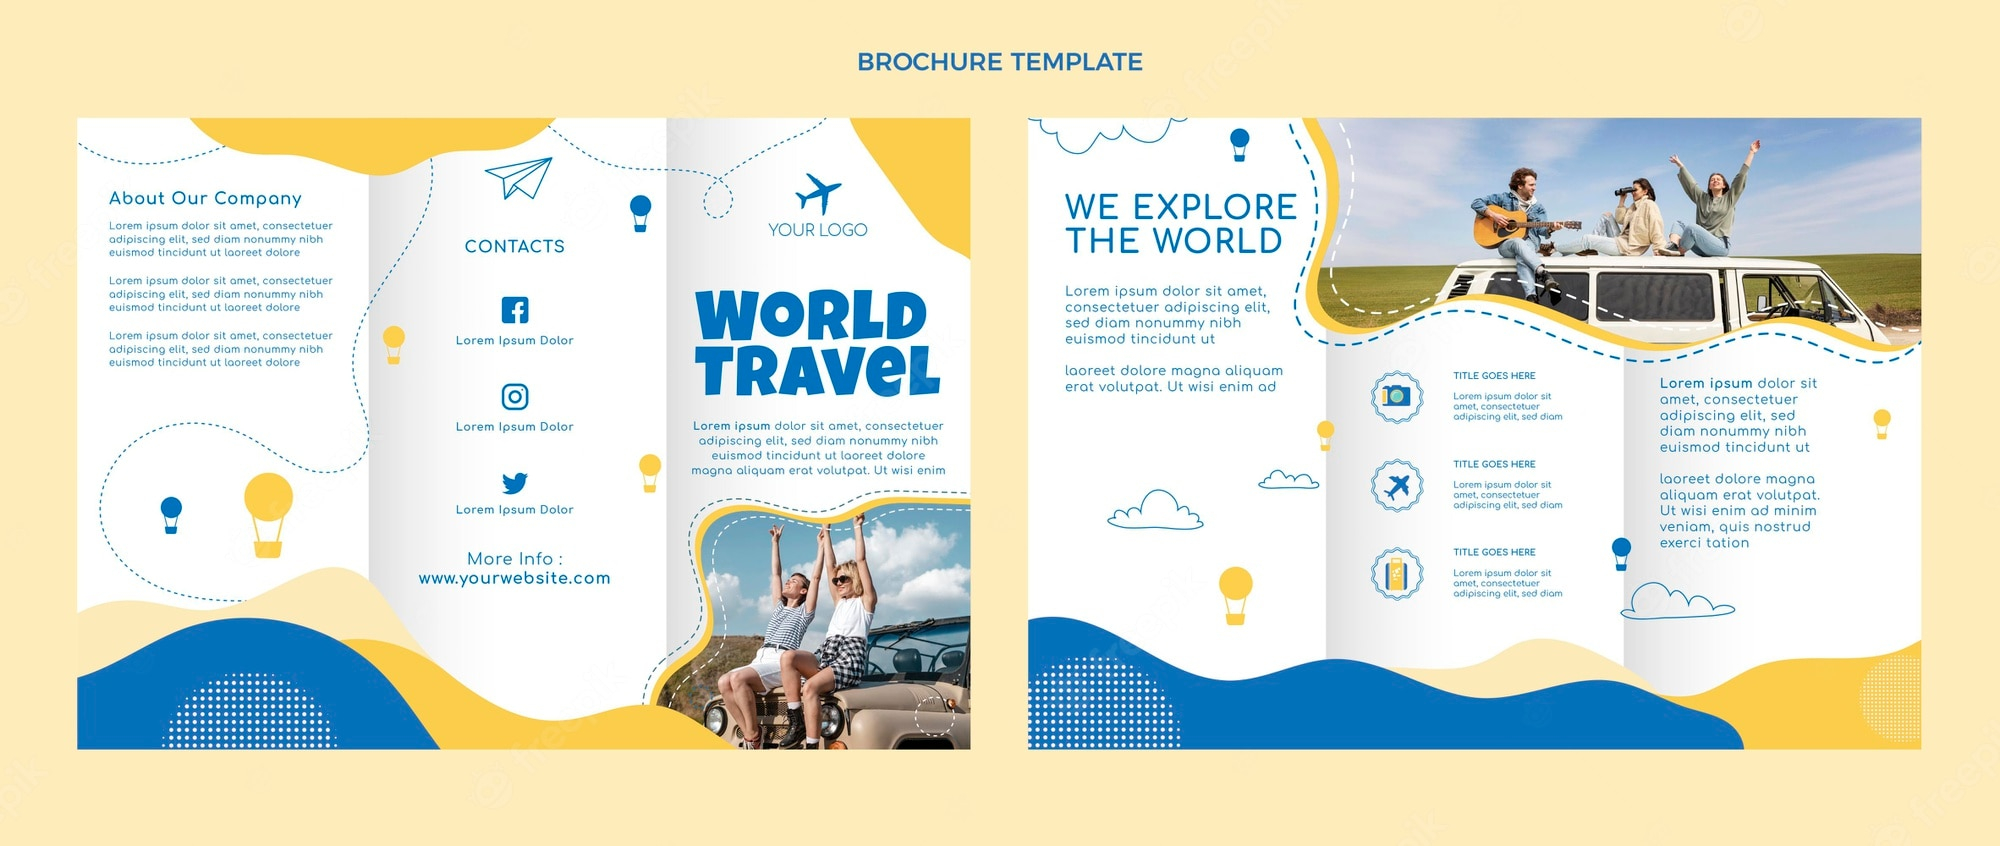 Travel brochure template Vectors & Illustrations for Free Download  Throughout Travel Brochure Template For Students